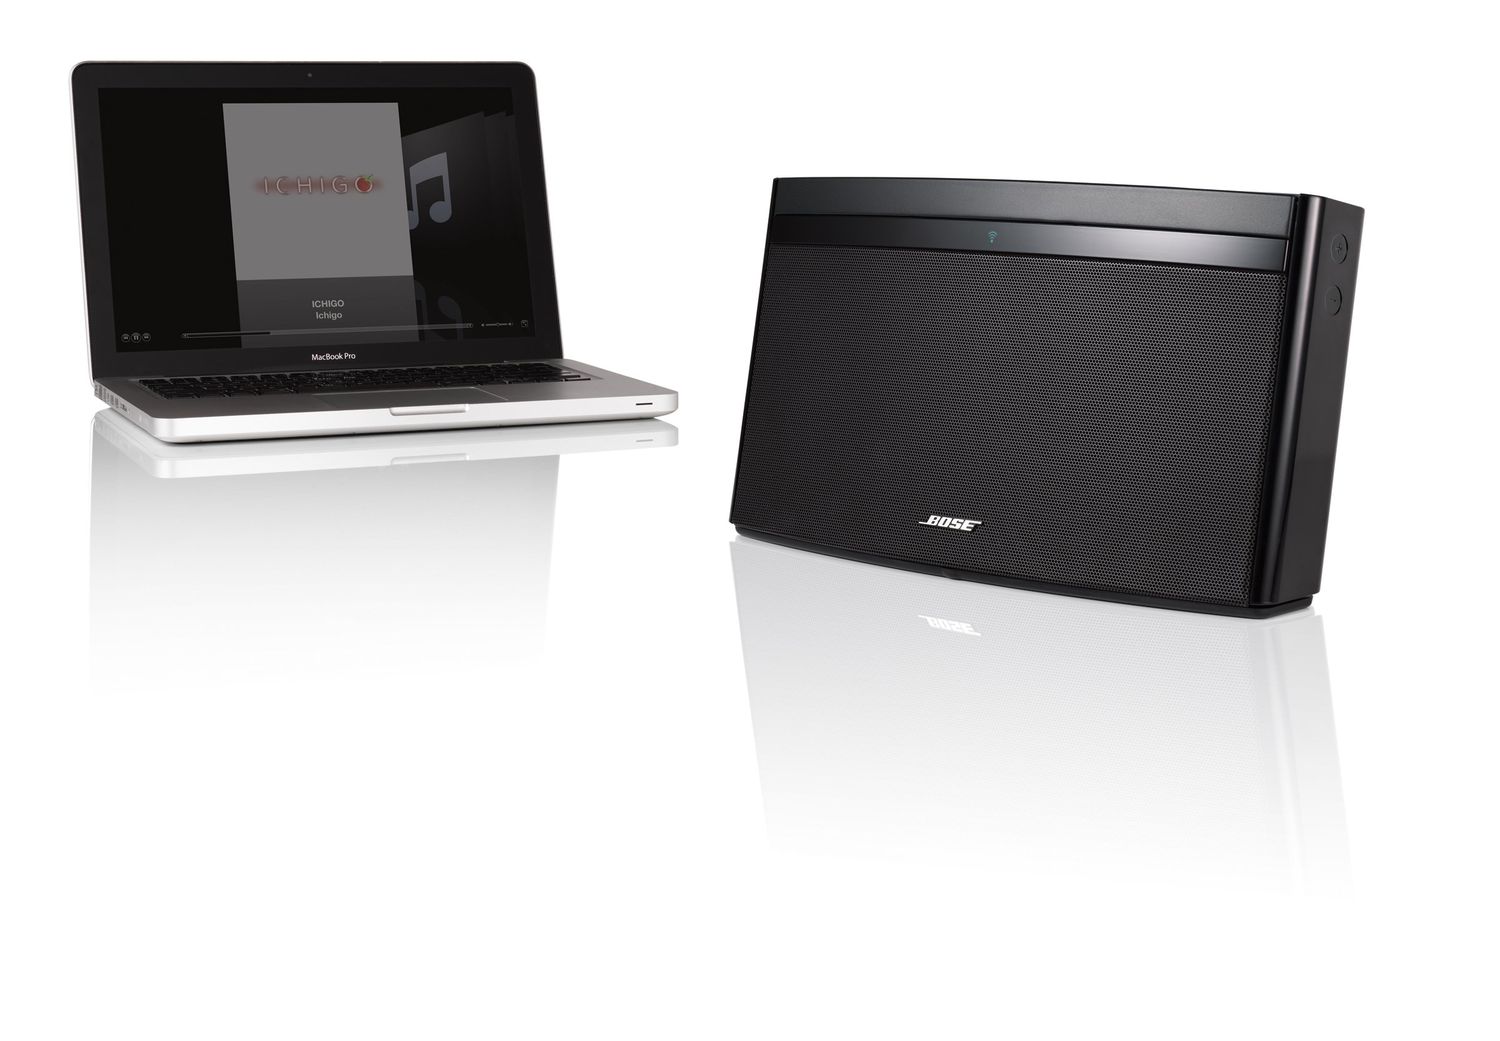 How To Connect To Bose Soundlink Air Digital Music System